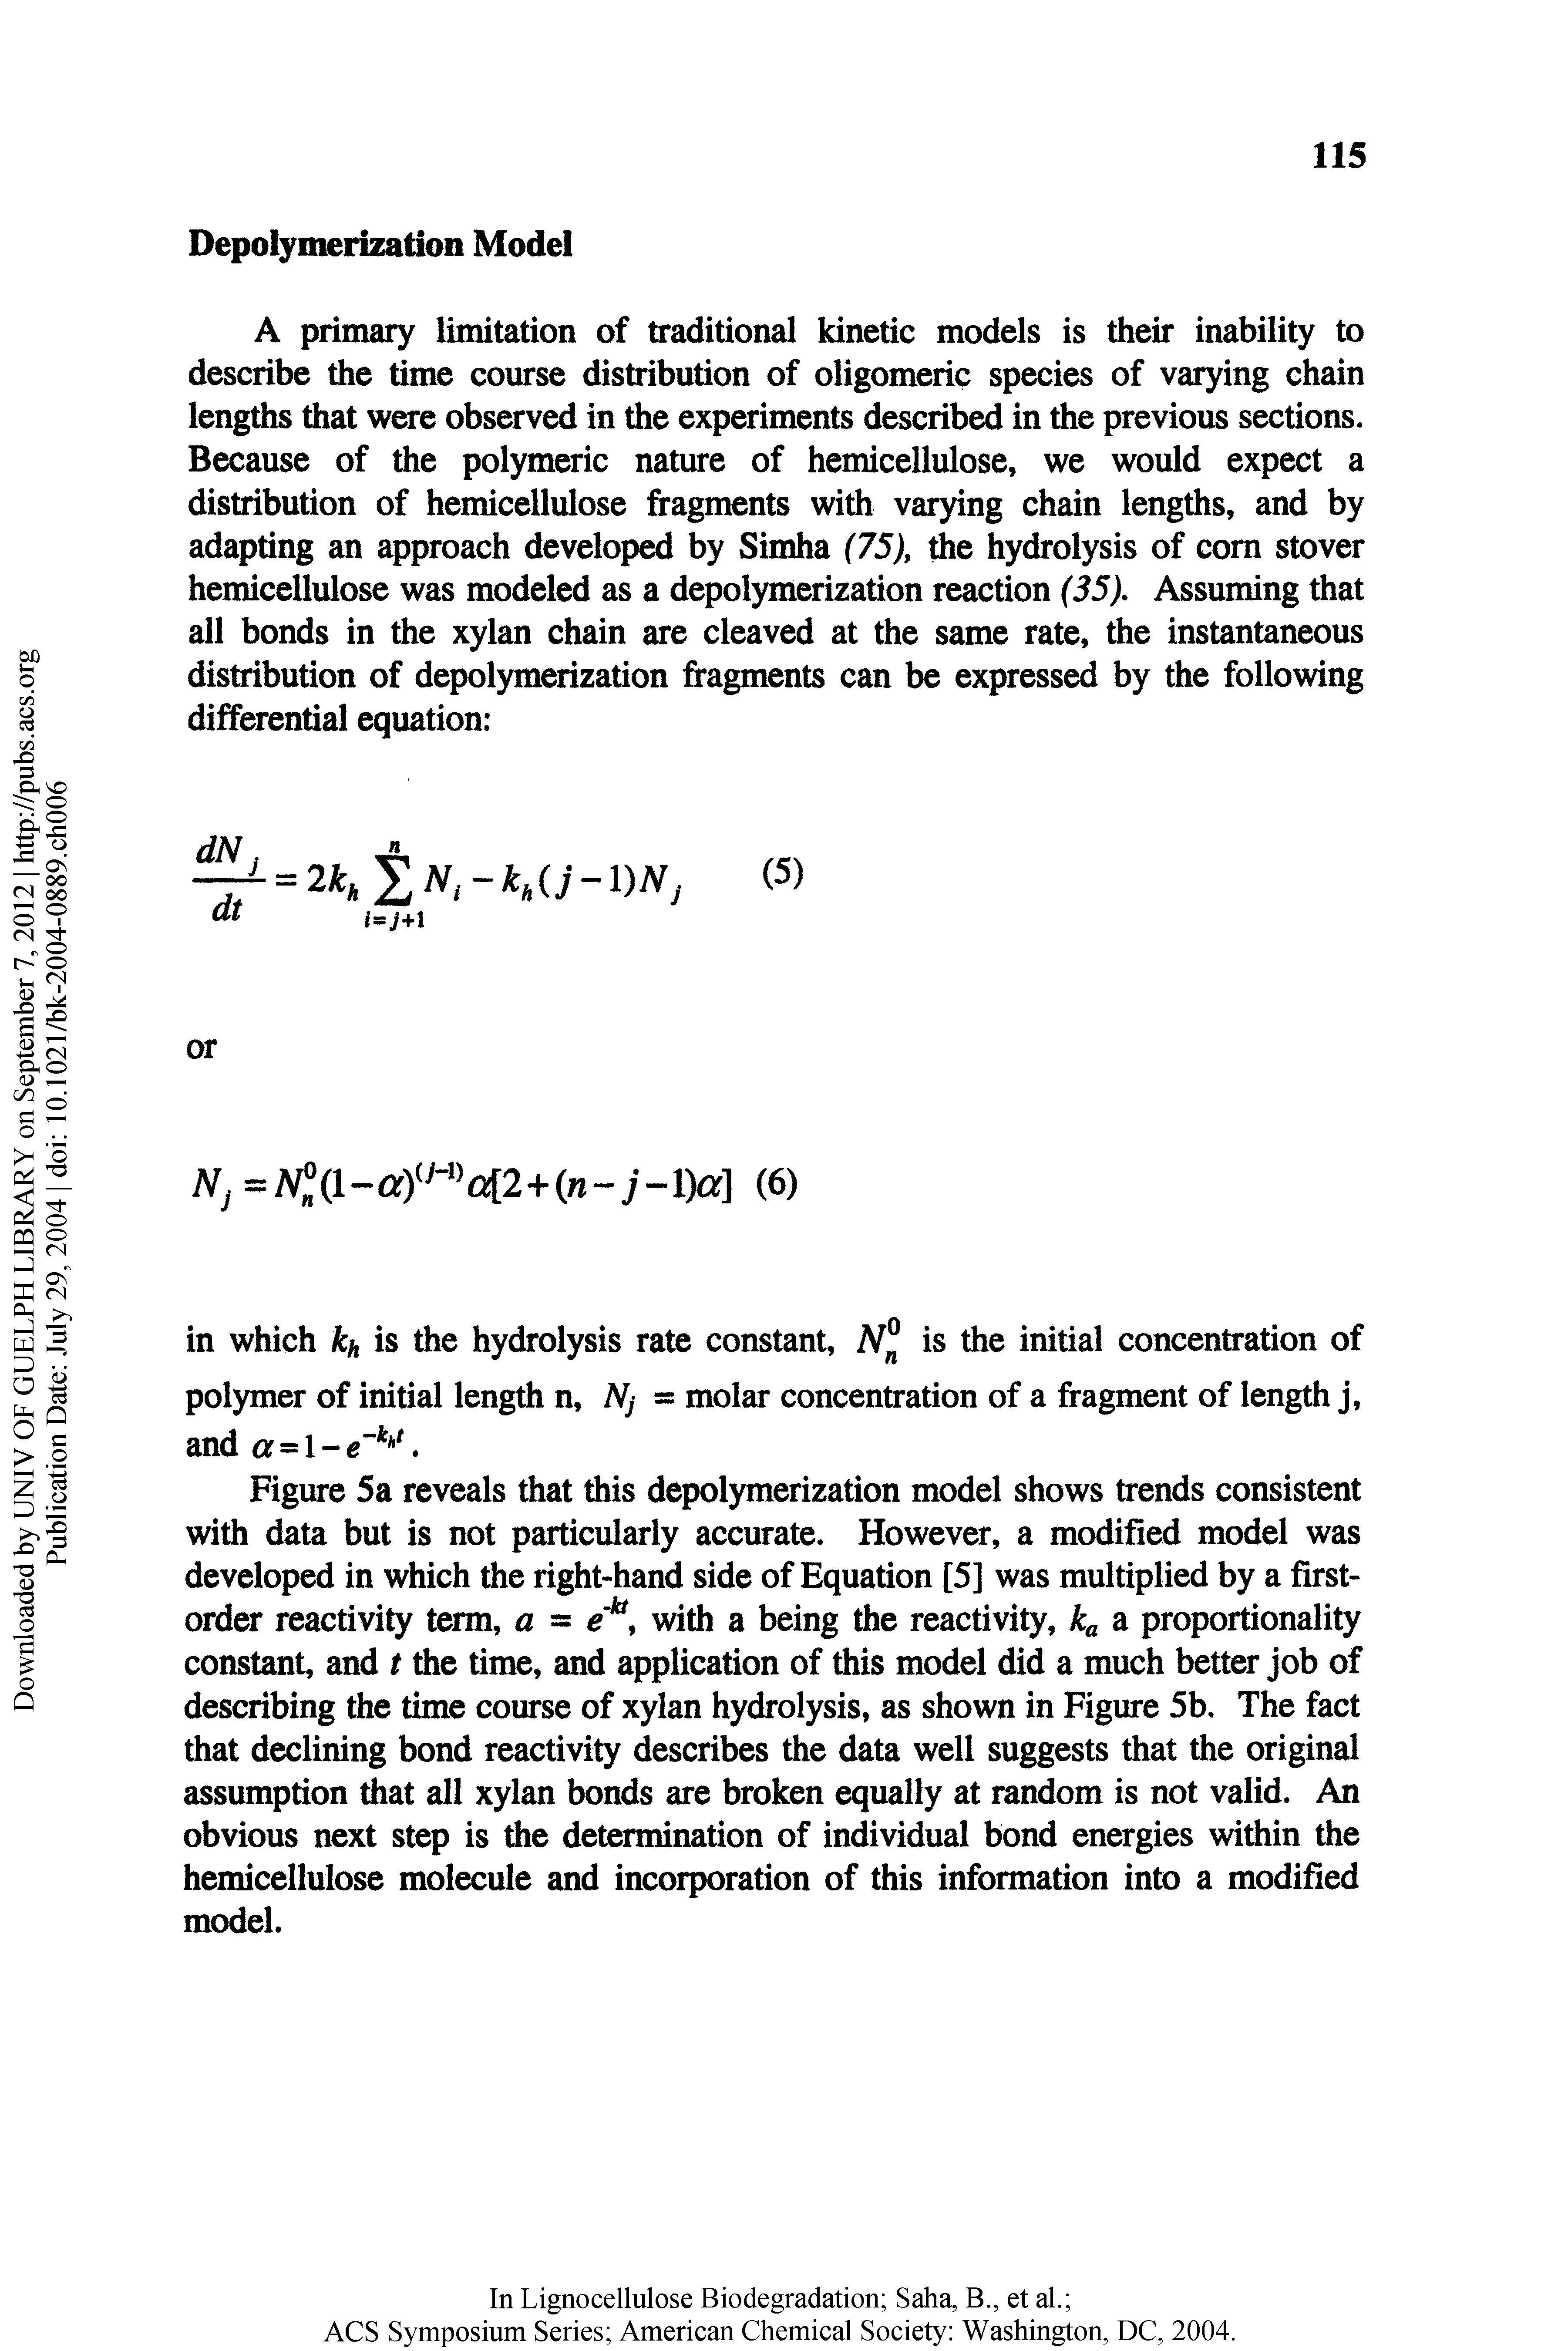 Figure 5a reveals that this depolymerization model shows trends consistent with data but is not particularly accurate. However, a modified model was developed in which die right-hand side of Equation [5] was multiplied by a first-order reactivity term, a = with a being the reactivity, ka a proportionality constant, and t the time, and application of this model did a much better job of describing the time course of xylan hydrolysis, as shown in Figure 5b. The fact that declining bond reactivity describes the data well suggests that the original assumption that all xylan bonds are broken equally at random is not valid. An obvious next step is the determination of individual bond energies within the hemicellulose molecule and incorporation of this information into a modified model.